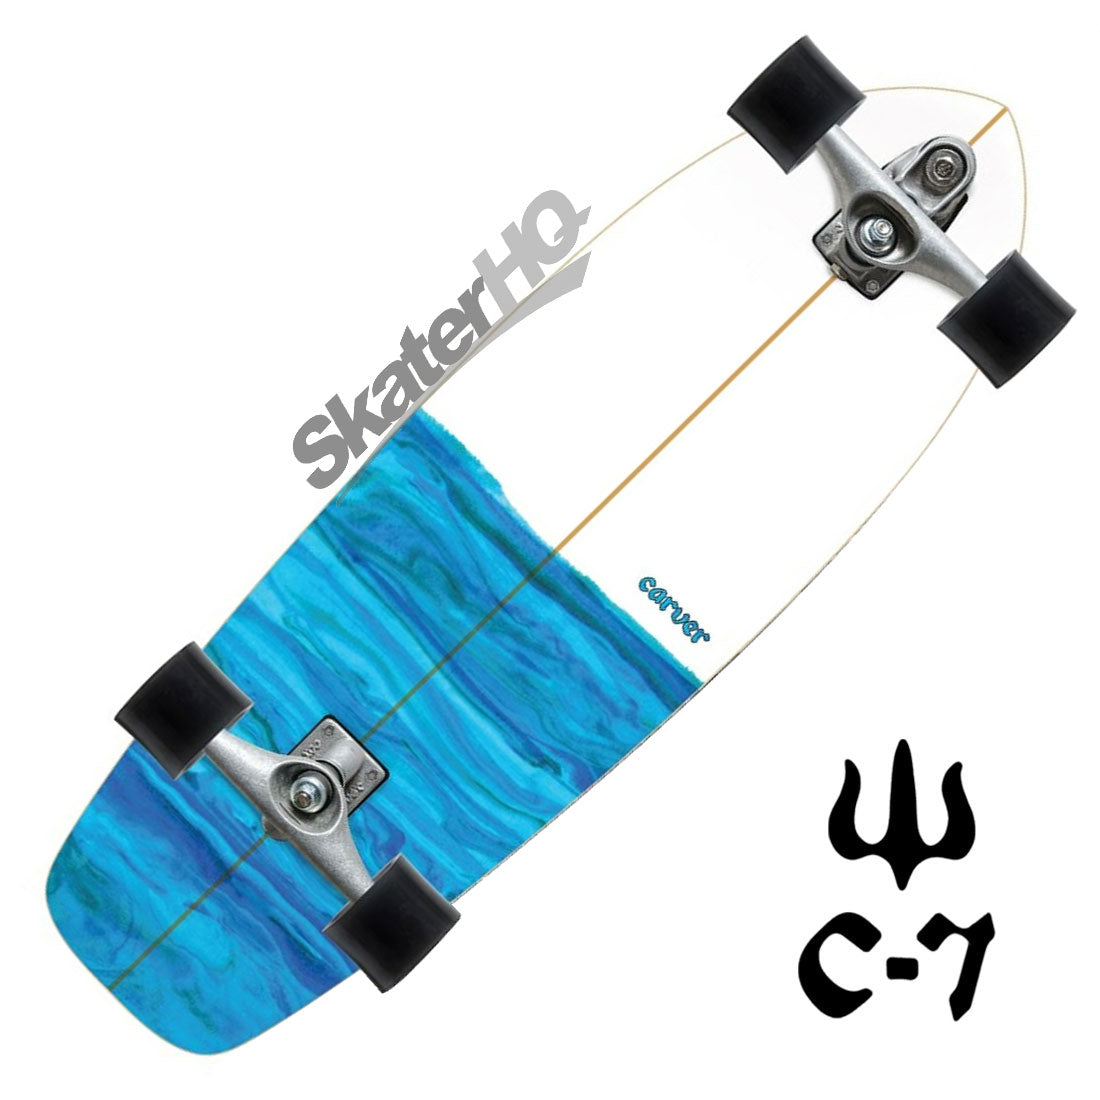 Carver Resin V2 C7 Raw Complete - White/Blue Skateboard Compl Carving and Specialty